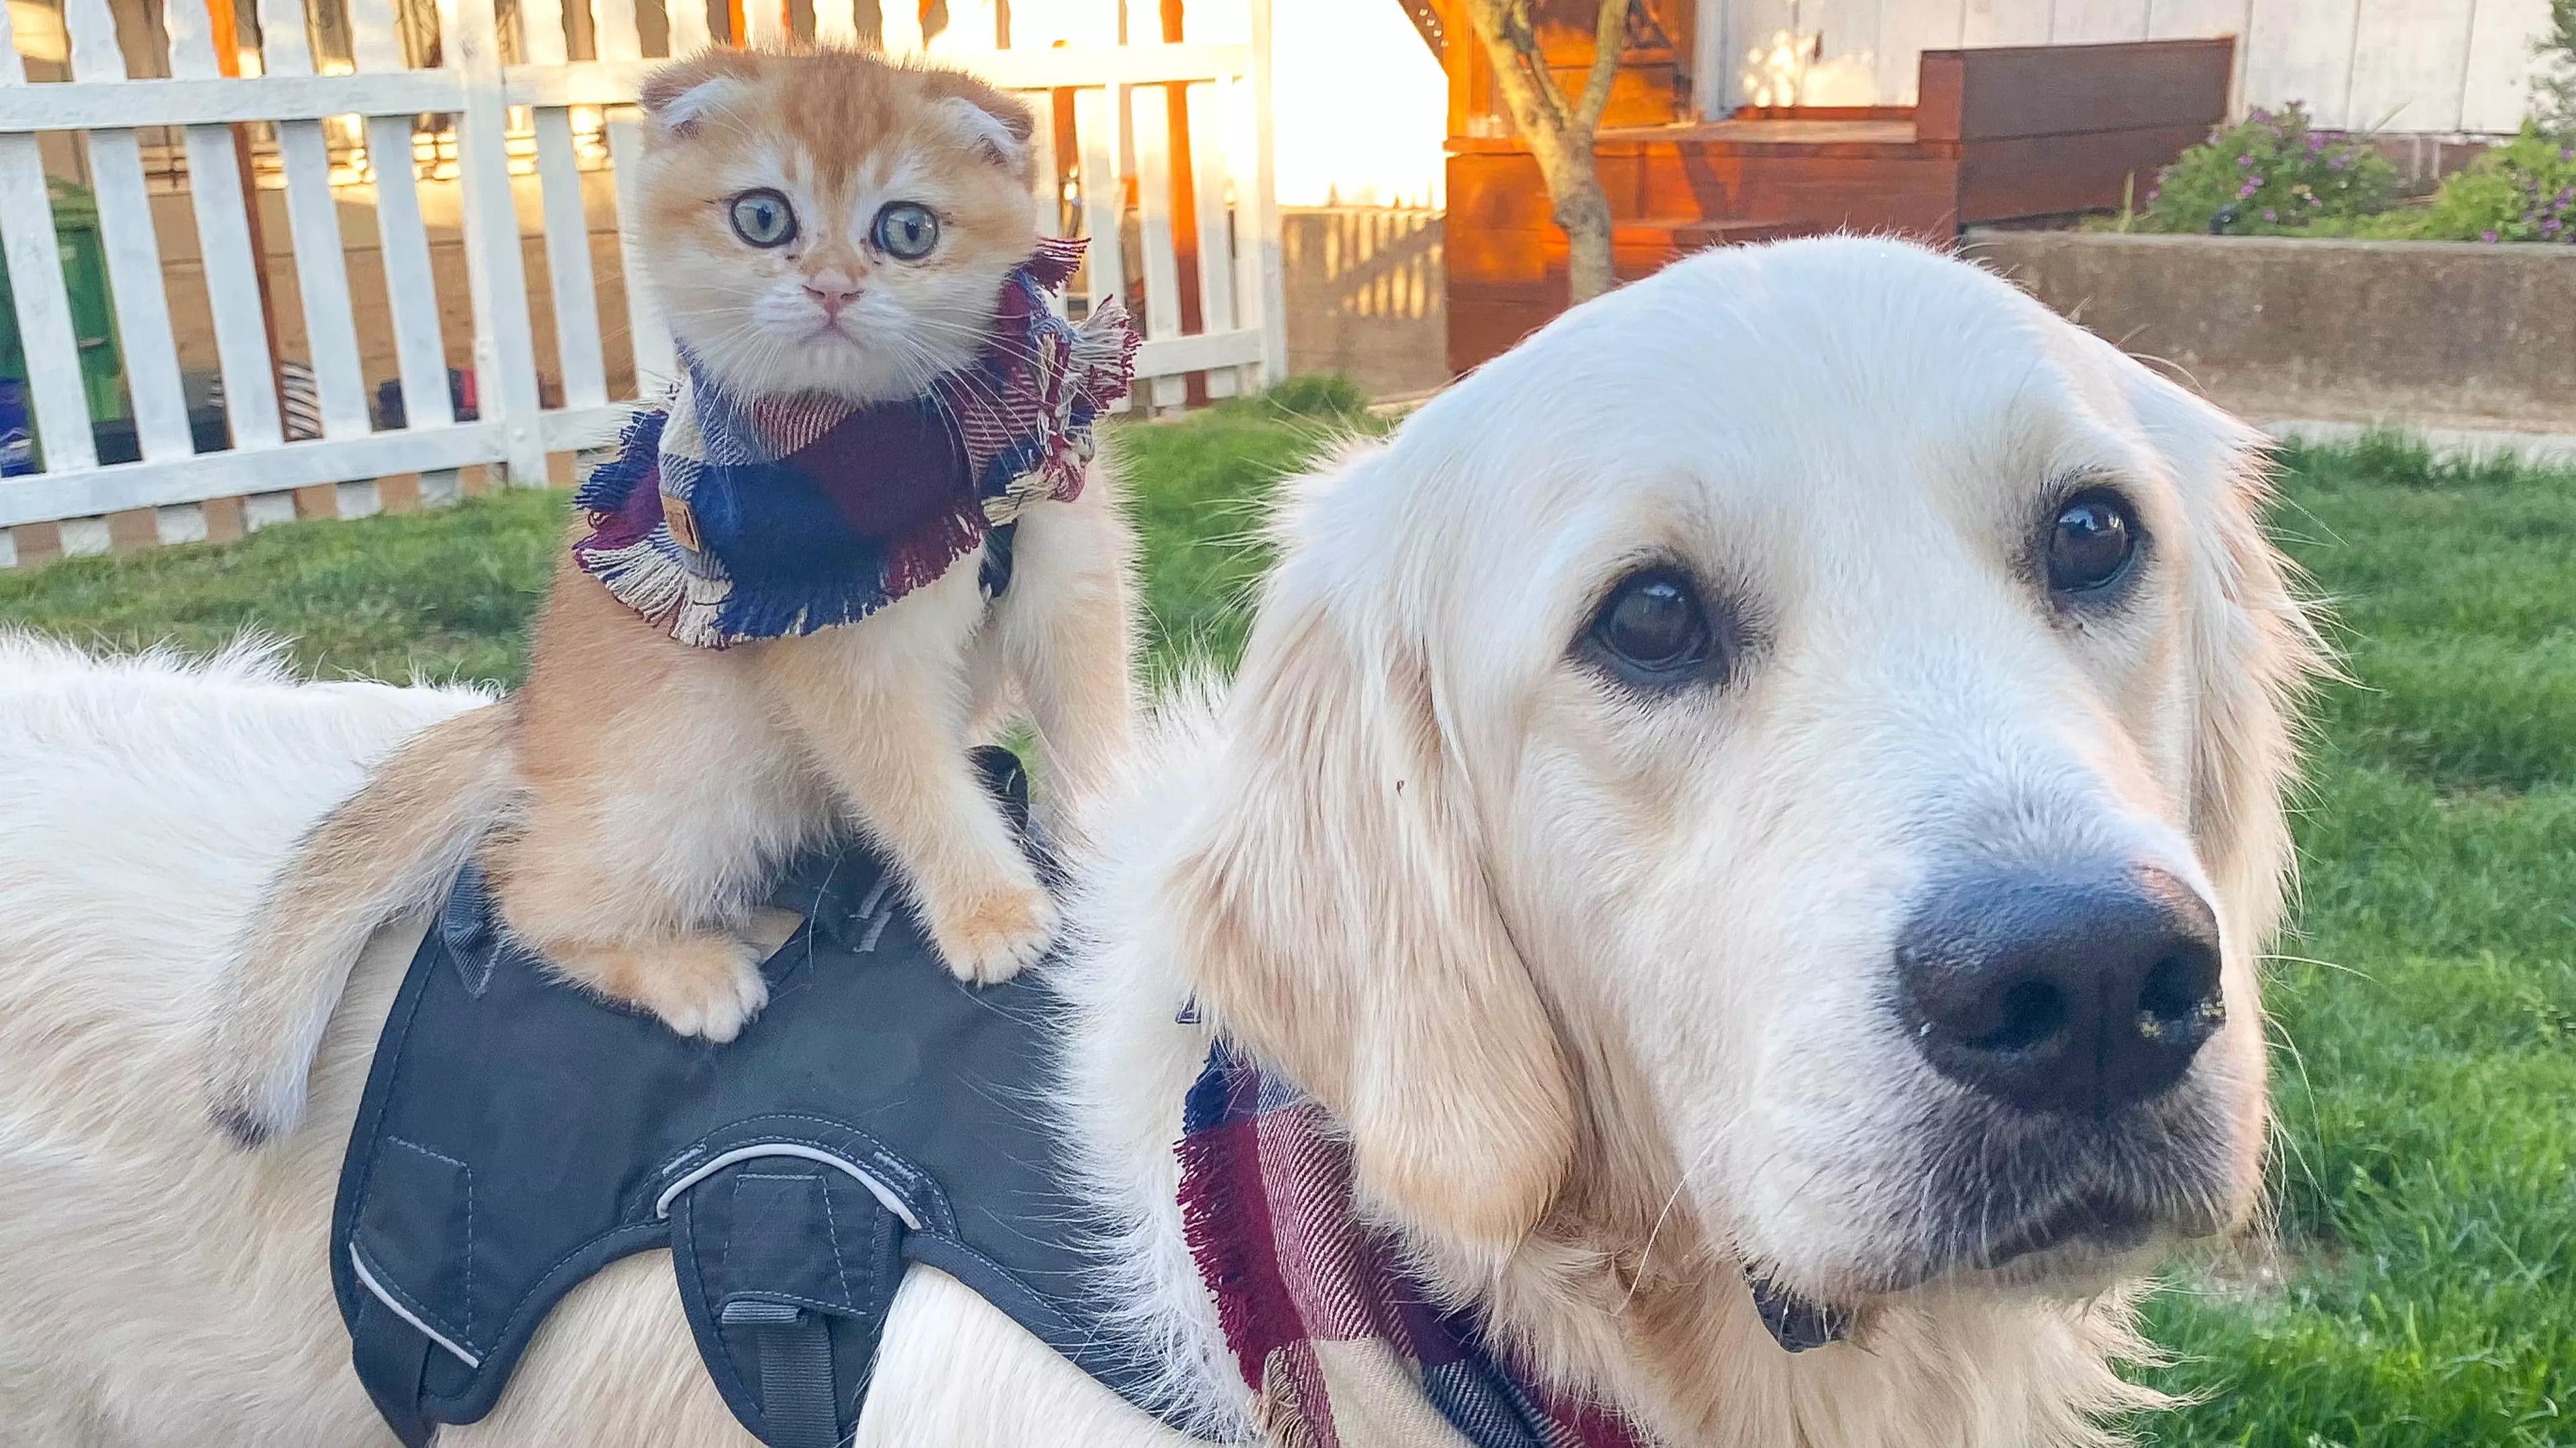 A Golden Retriever Strikes Up Adorable Bond With Six-Month Old Kitten